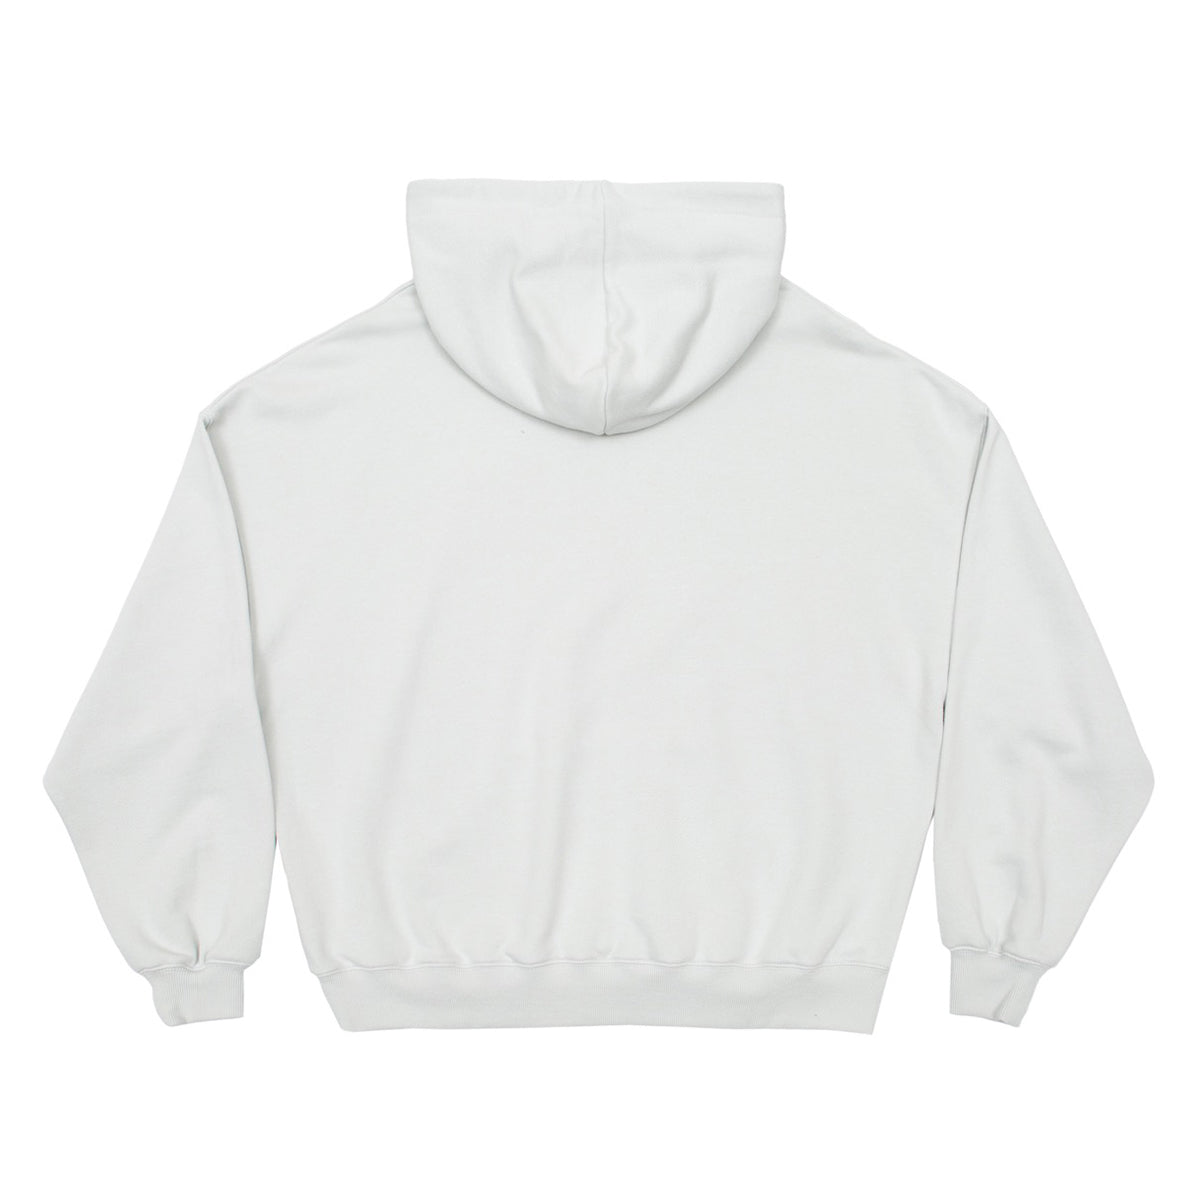 FORTUNE HOODIE PALE GRAY